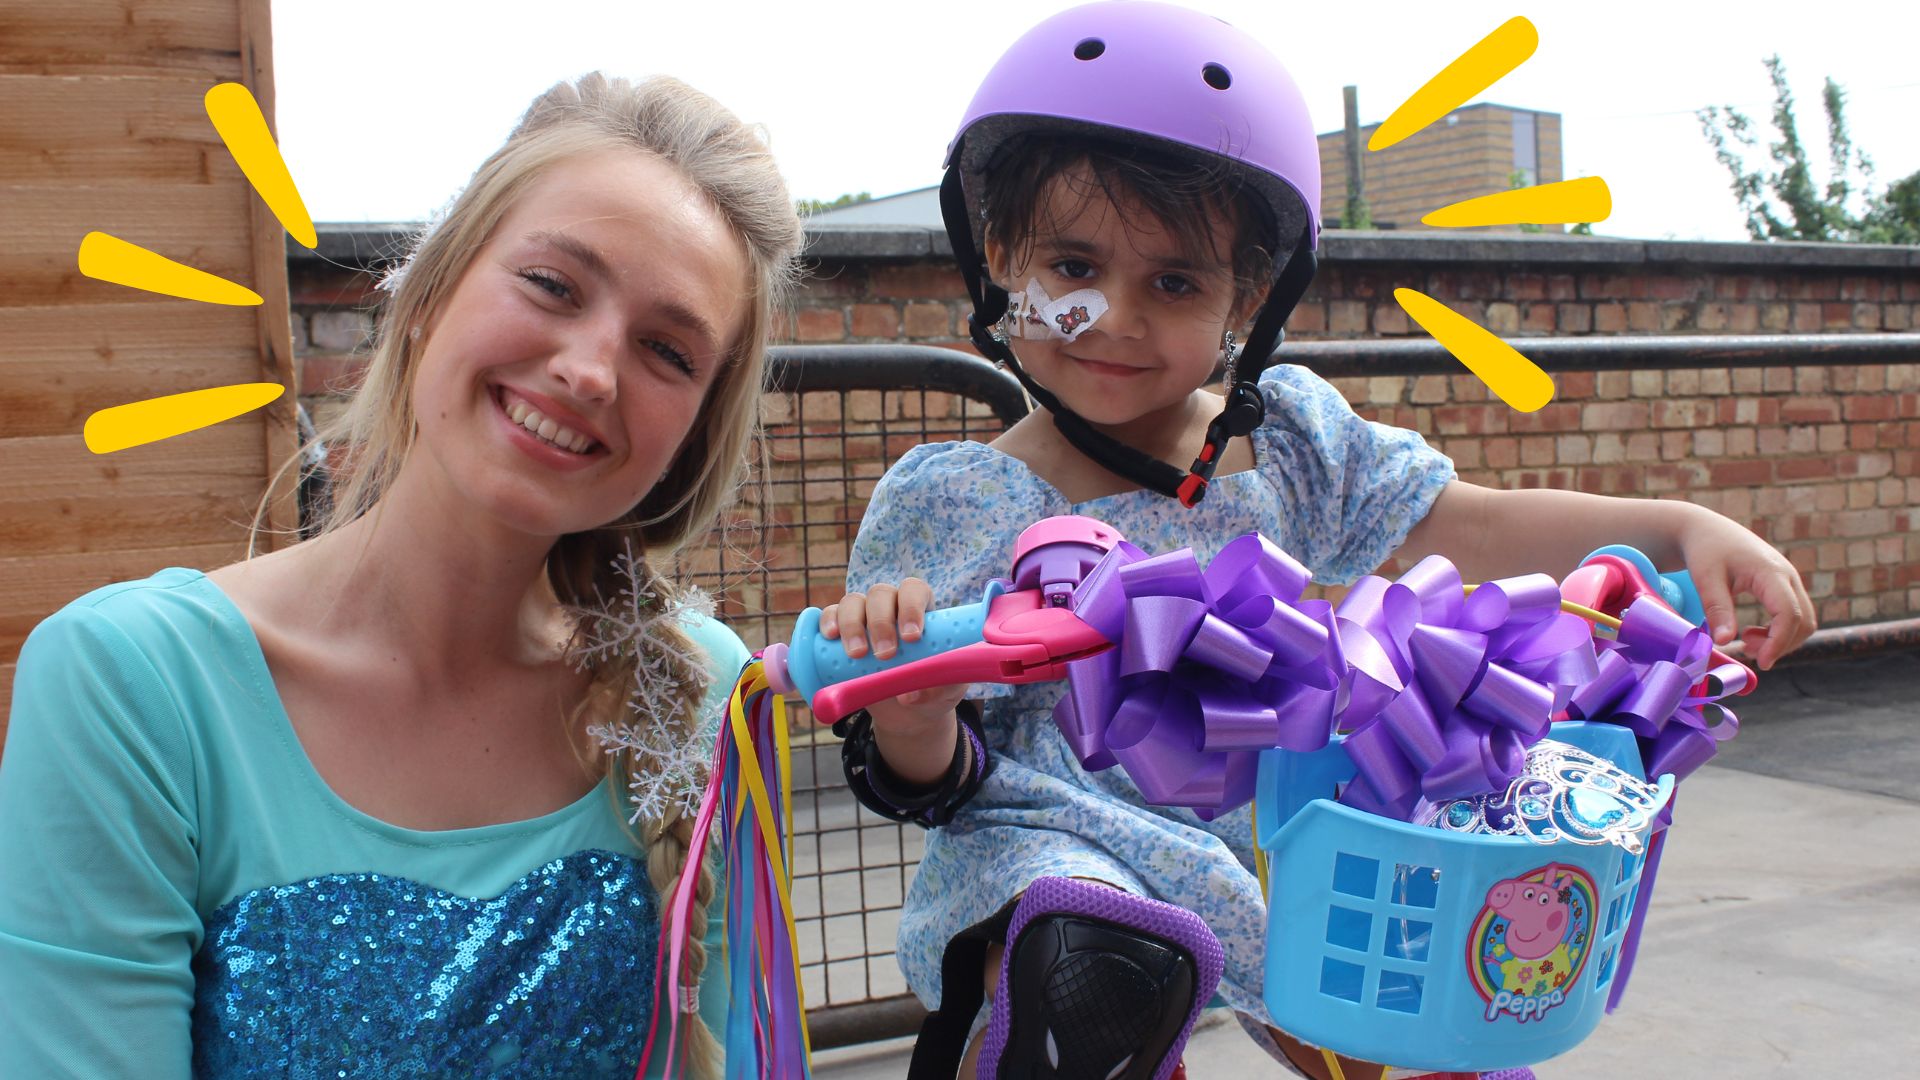 A little girl with a feeding tube is riding a Peppa Pig bike which is adorned with a big purple bow. She is next to a blonde woman dressed as Elsa.